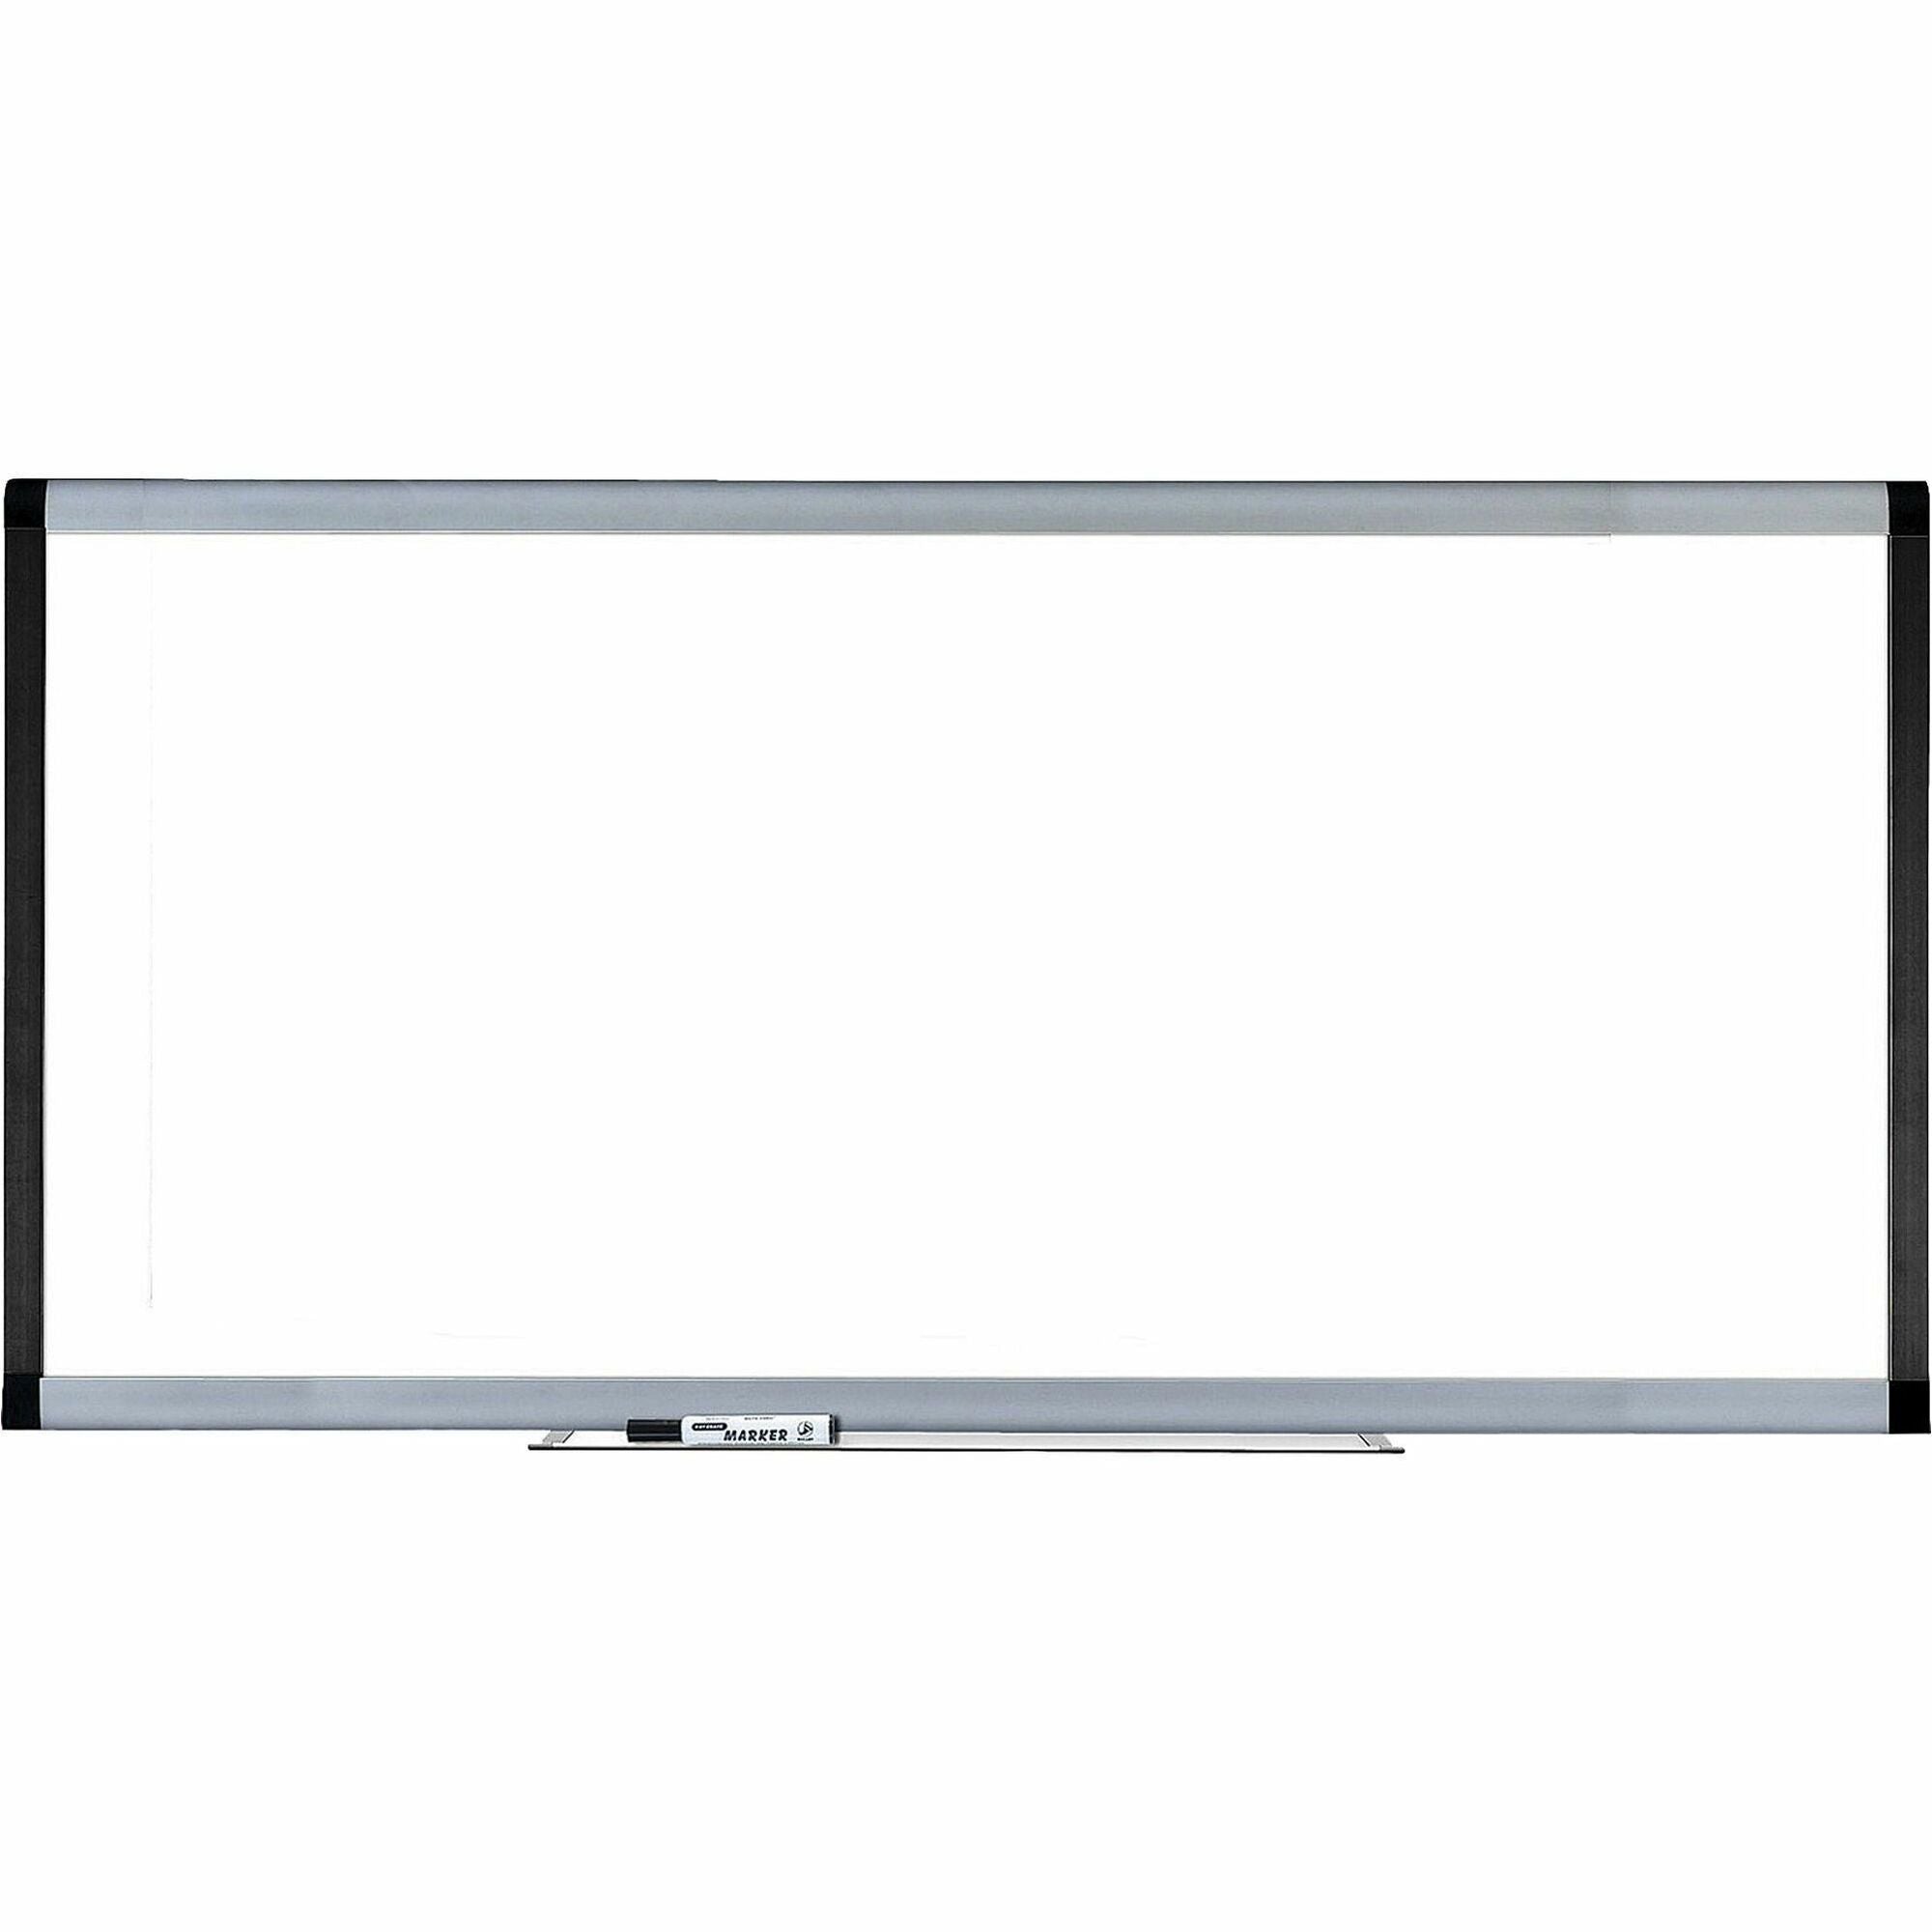 Lorell Signature Series Magnetic Dry-erase Markerboard - 96" (8 ft) Width x 48" (4 ft) Height - Coated Steel Surface - Silver, Ebony Frame - Magnetic - 1 Each - 